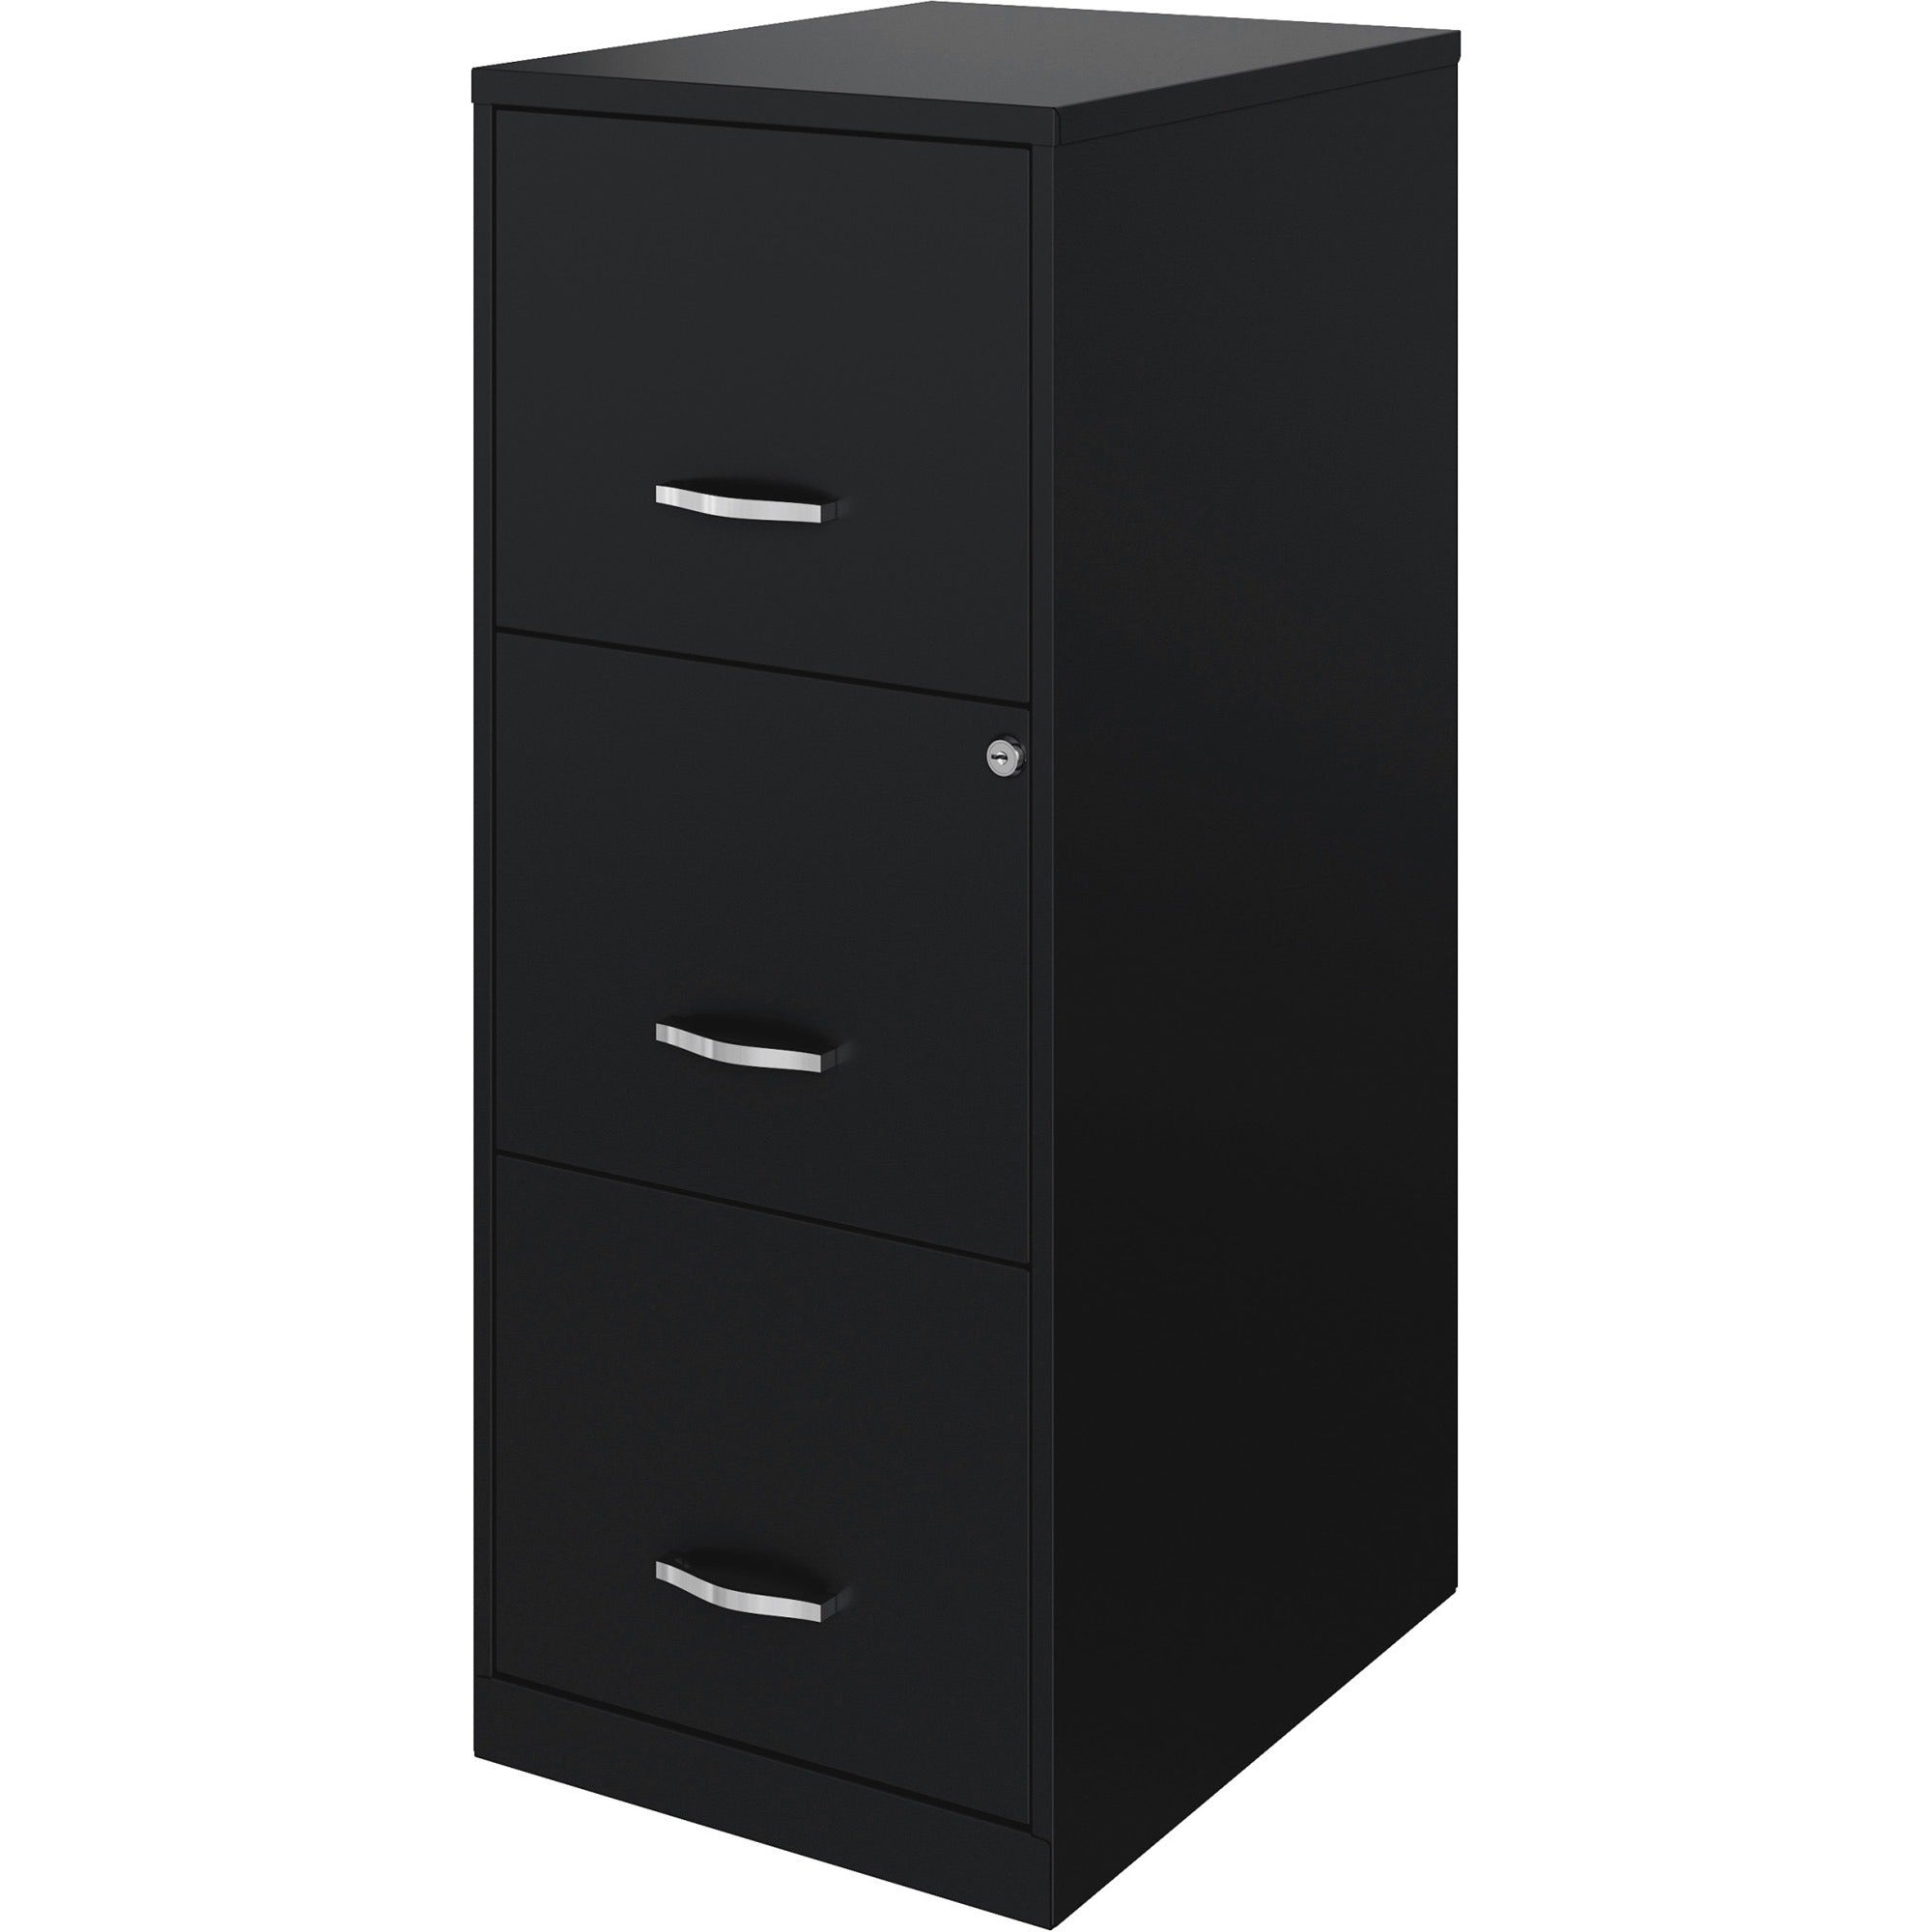 nusparc-vertical-file-cabinet-142-x-18-x-355-3-x-drawers-for-file-letter-vertical-cam-lock-glide-suspension-anti-tip-nonporous-surface-3-4-drawer-extension-black-baked-enamel-metal-recycled_nprvf318ffbk - 3